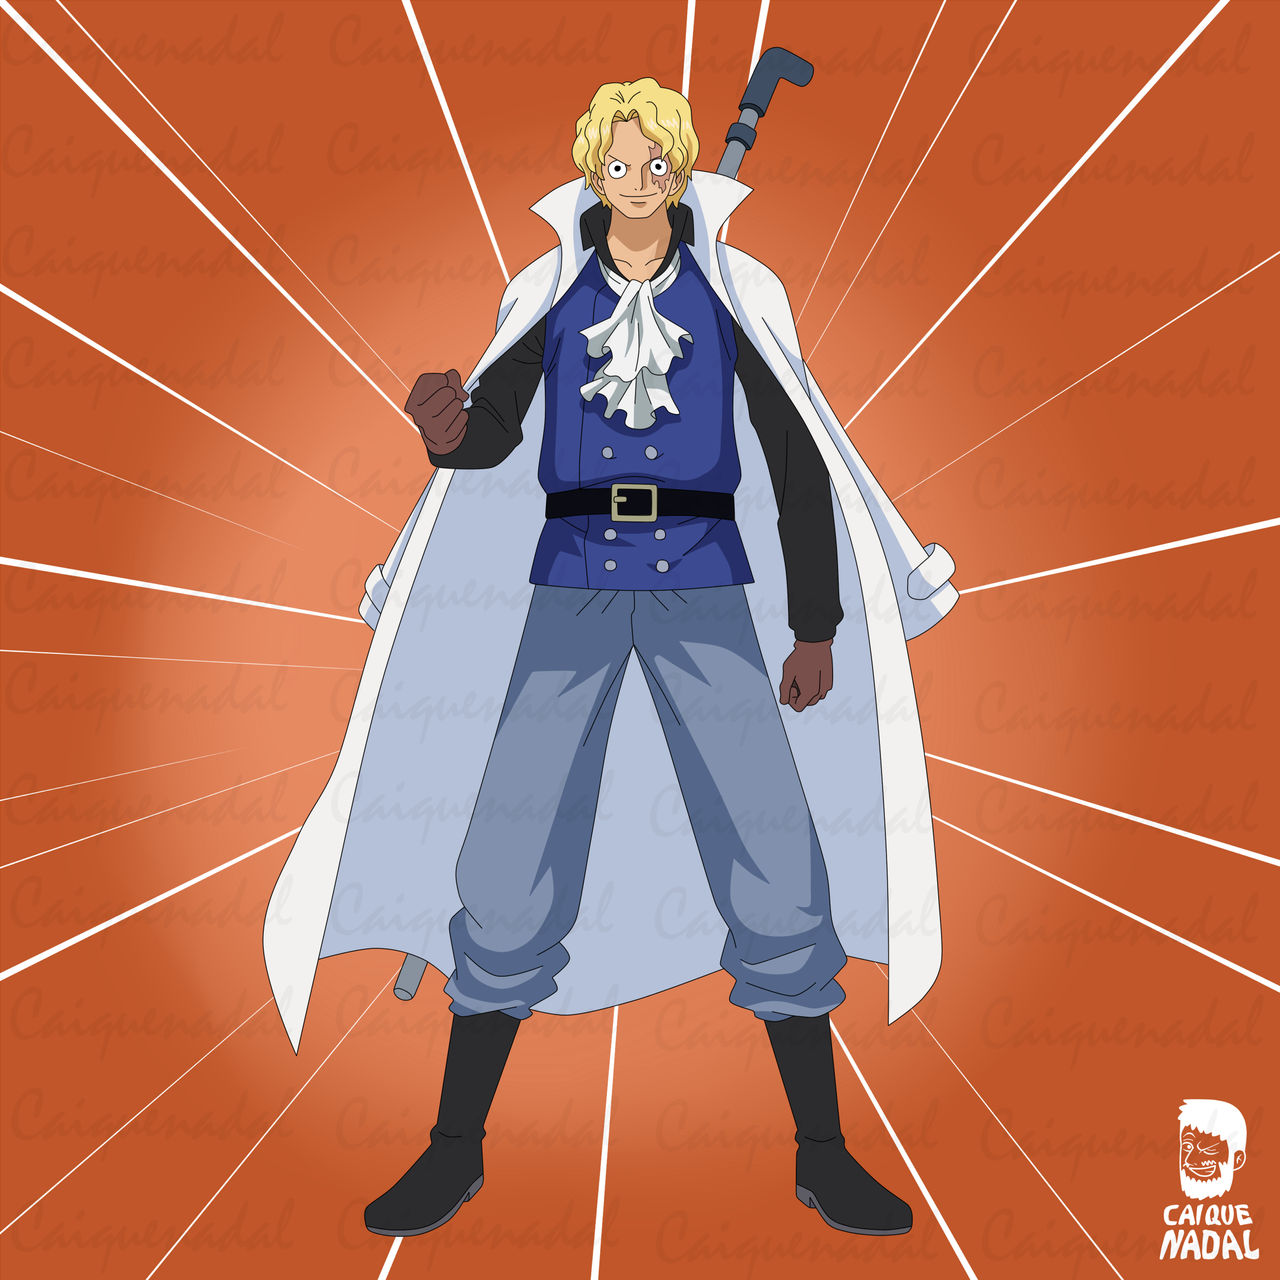 Sabo - One Piece by caiquenadal on DeviantArt